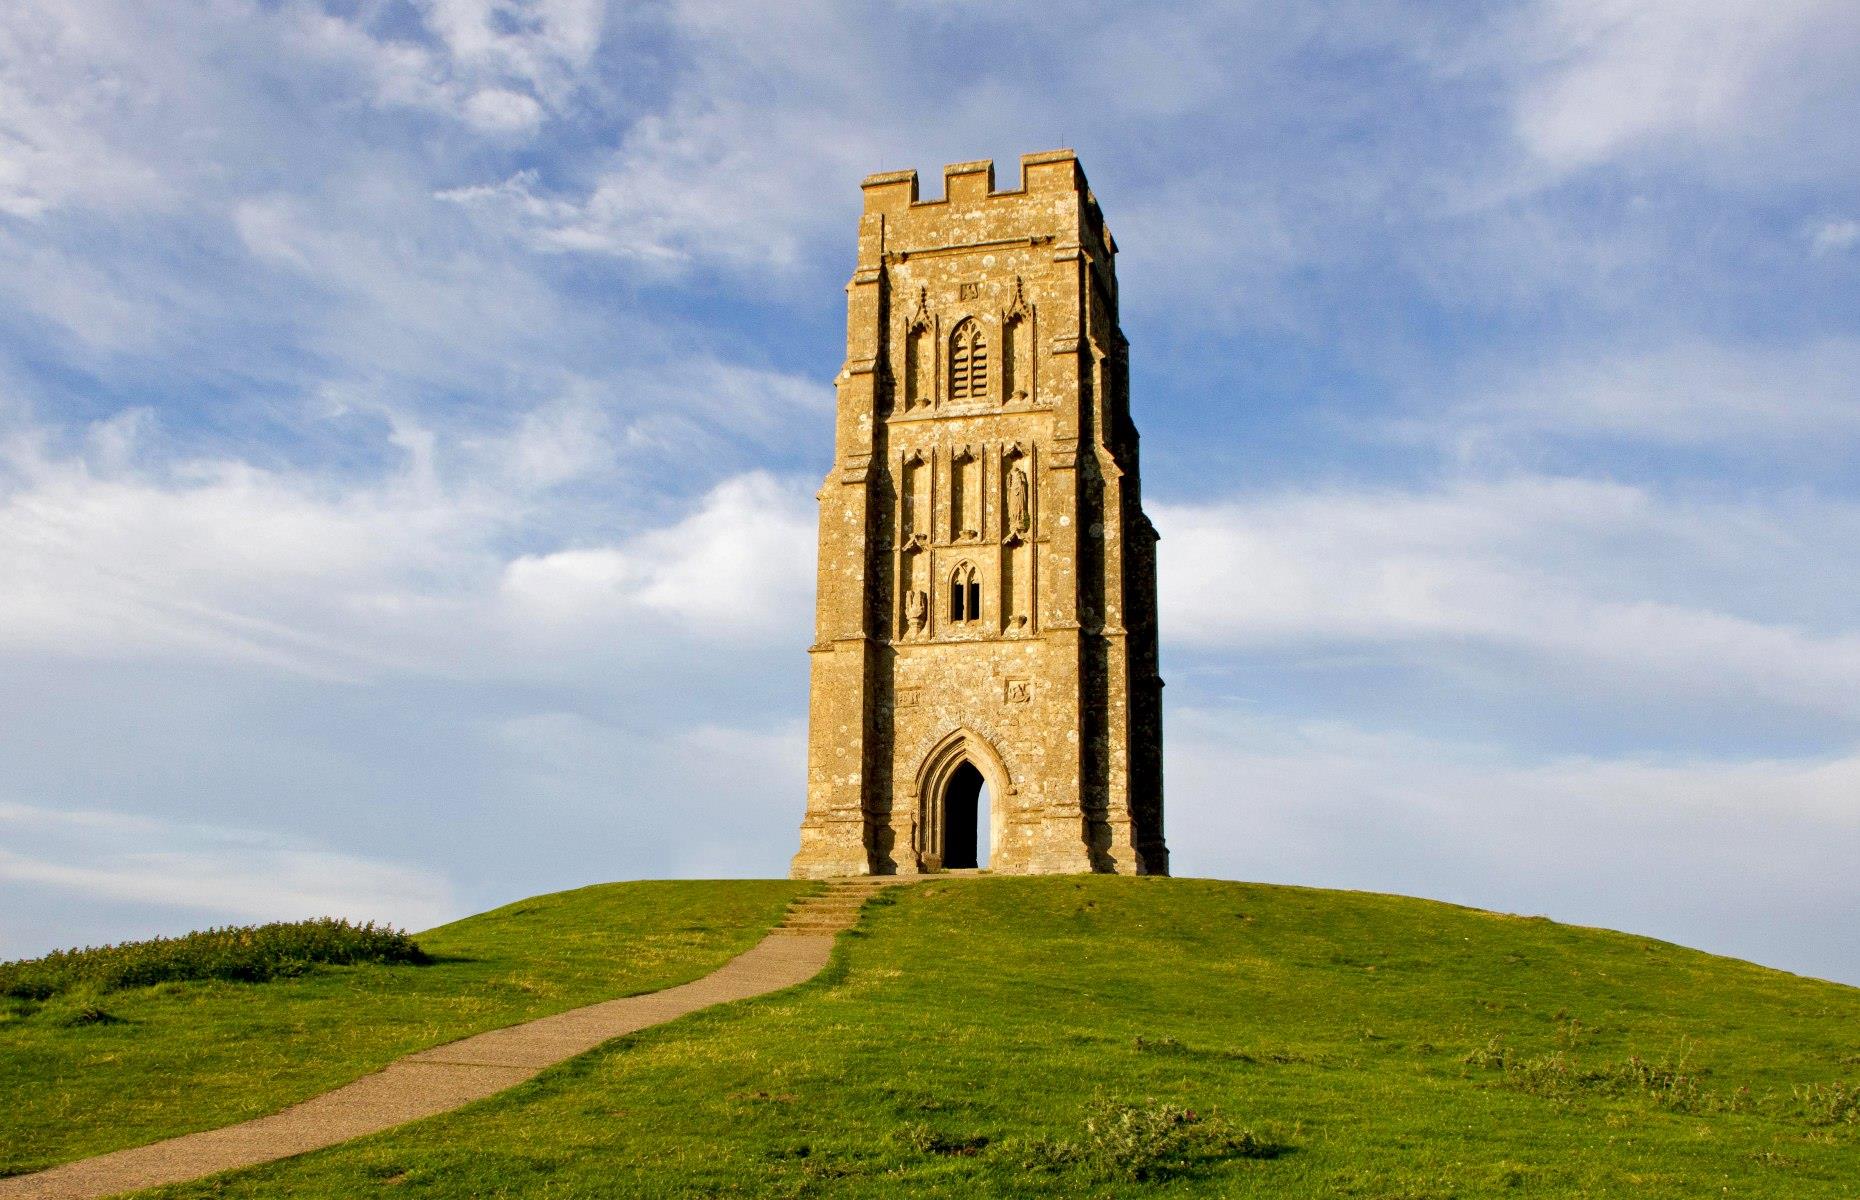 Overlooking Somerset’s scenic countryside, Glastonbury Tor has been one of Britain’s most spiritual sites for Pagans and Christians for over 1,000 years. Linked to myths and legends, it’s thought that beneath the hill there is a hidden cave that you can pass through into the fairy realm of Annwn. The beautiful remains of the 14th-century church of St Michael tower over its grassy summit, offering sweeping panoramas across the tranquil landscape.